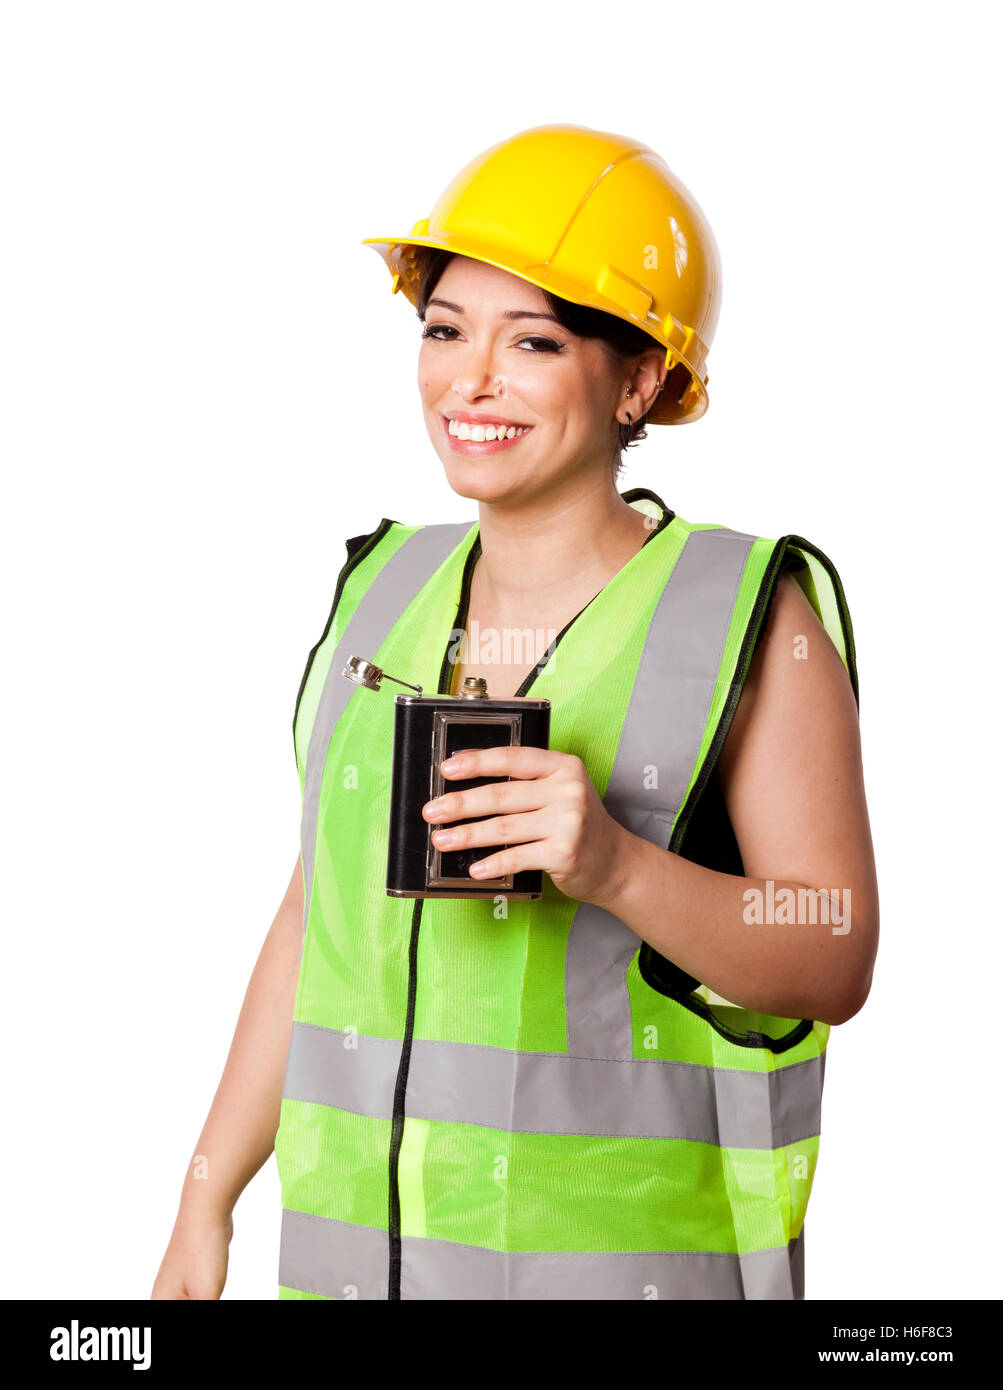 Caucasian young adult woman in her mid 20s wearing reflective yellow safety helmet and safety vest, giving the camera a drunken Stock Photo